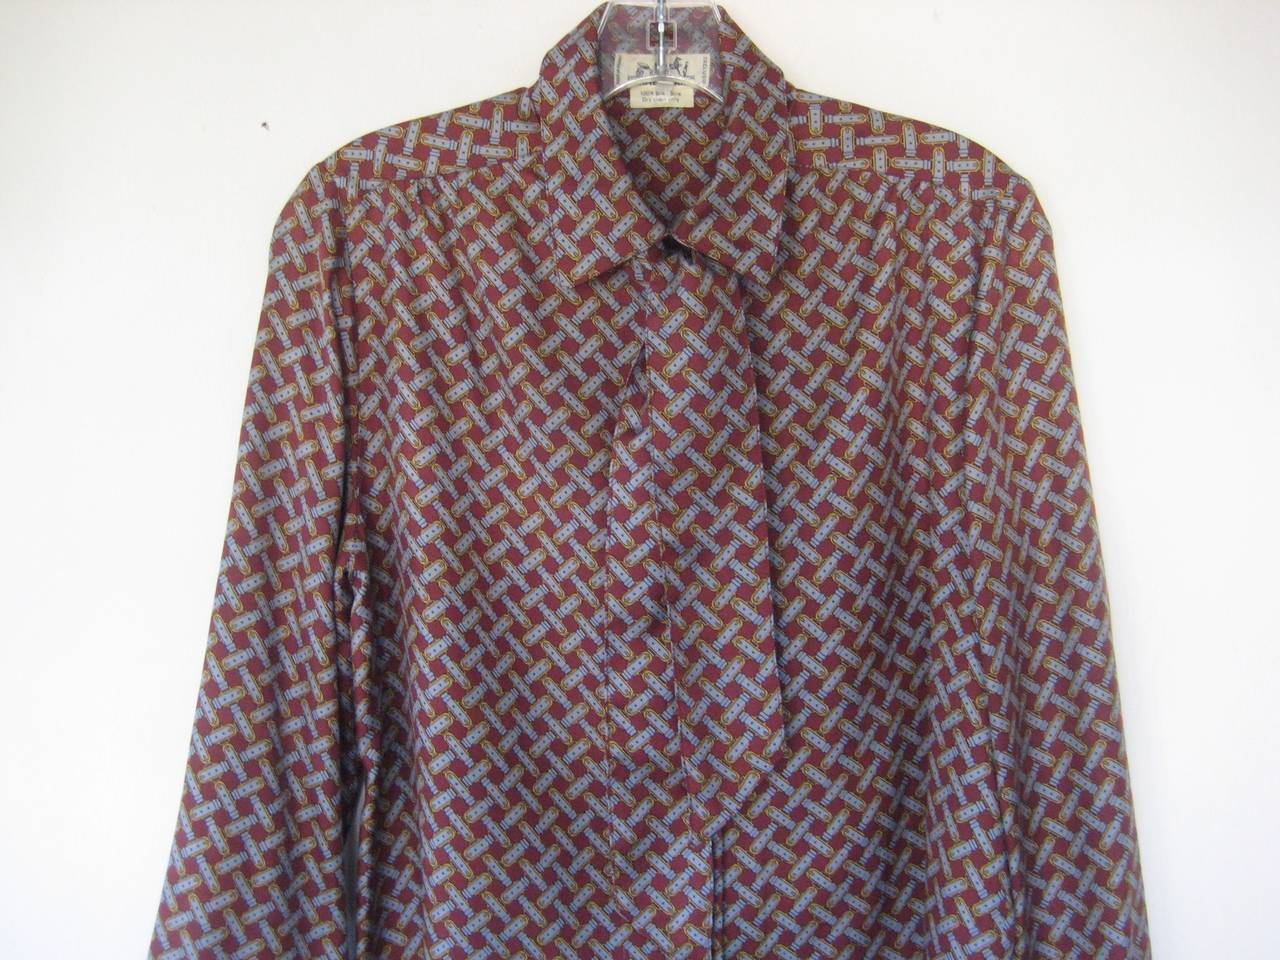 Vintage Hermes Buckle Print Blouse with Matching Twilly Tie For Sale 2